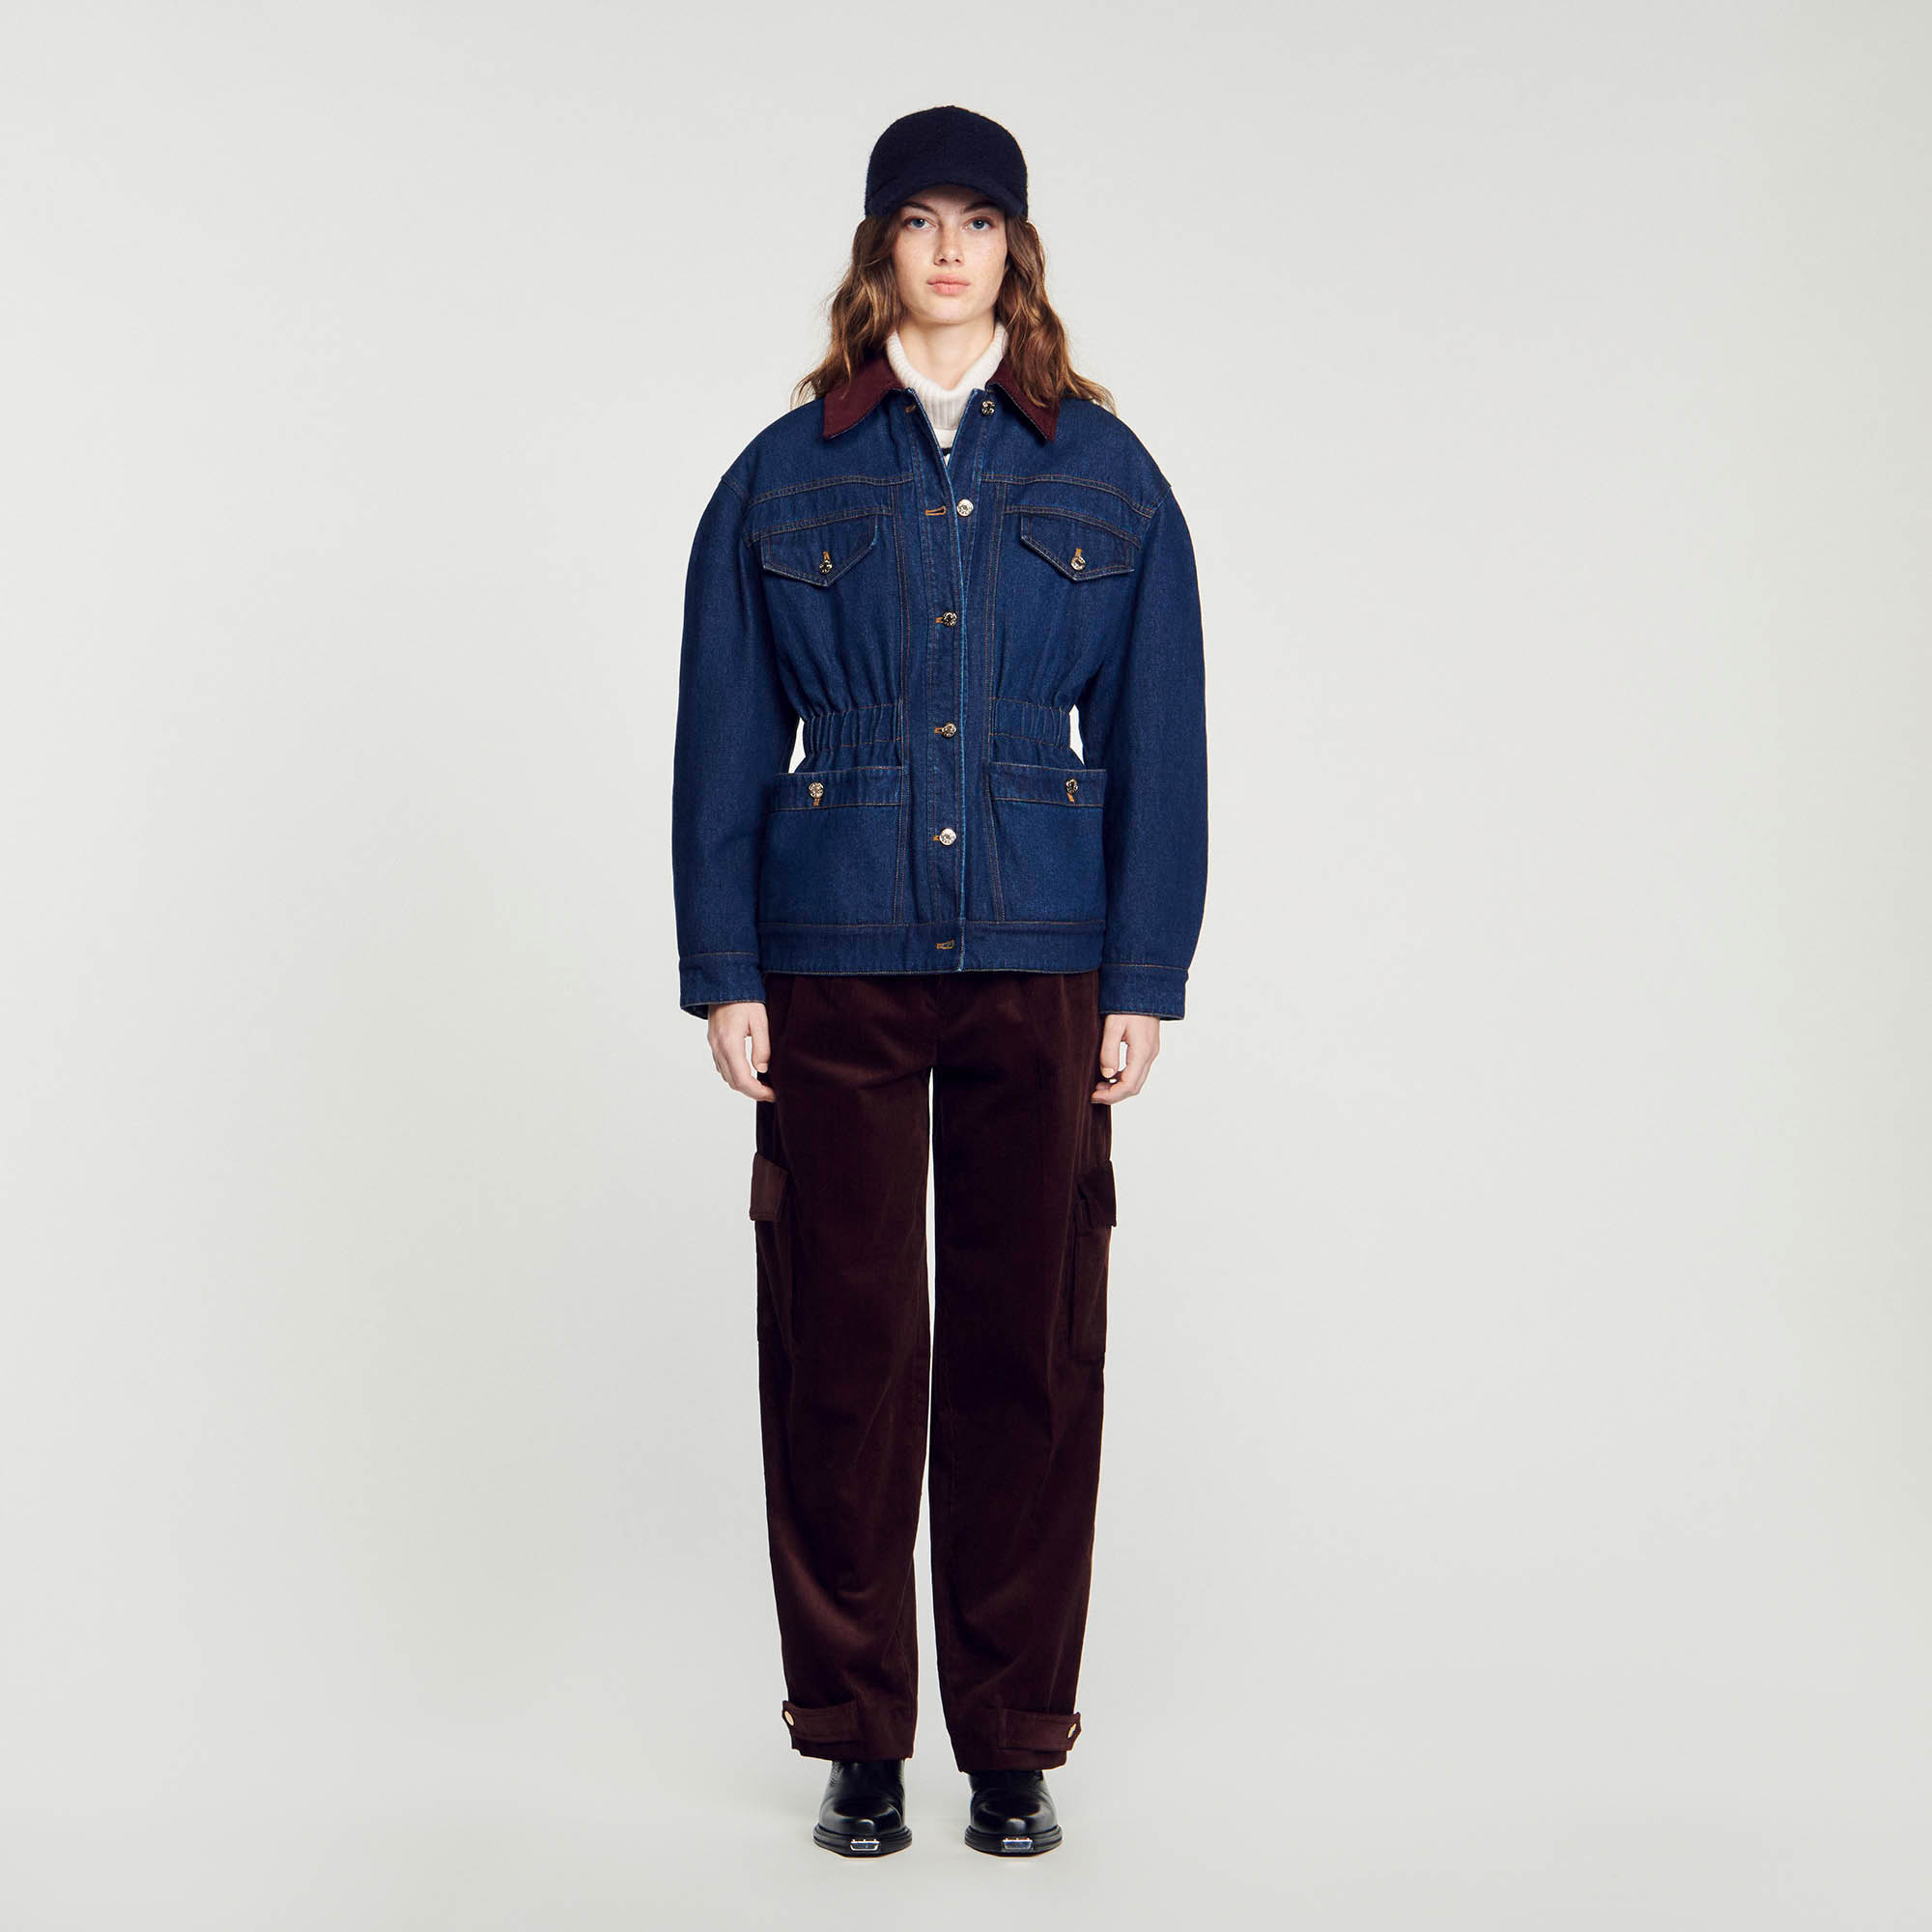 Sandro cotton Lining: Reversible quilted jacket in denim on one side and patterned on the other, featuring a contrasting collar, long sleeves, an elasticated waistband and front patch and flap pockets